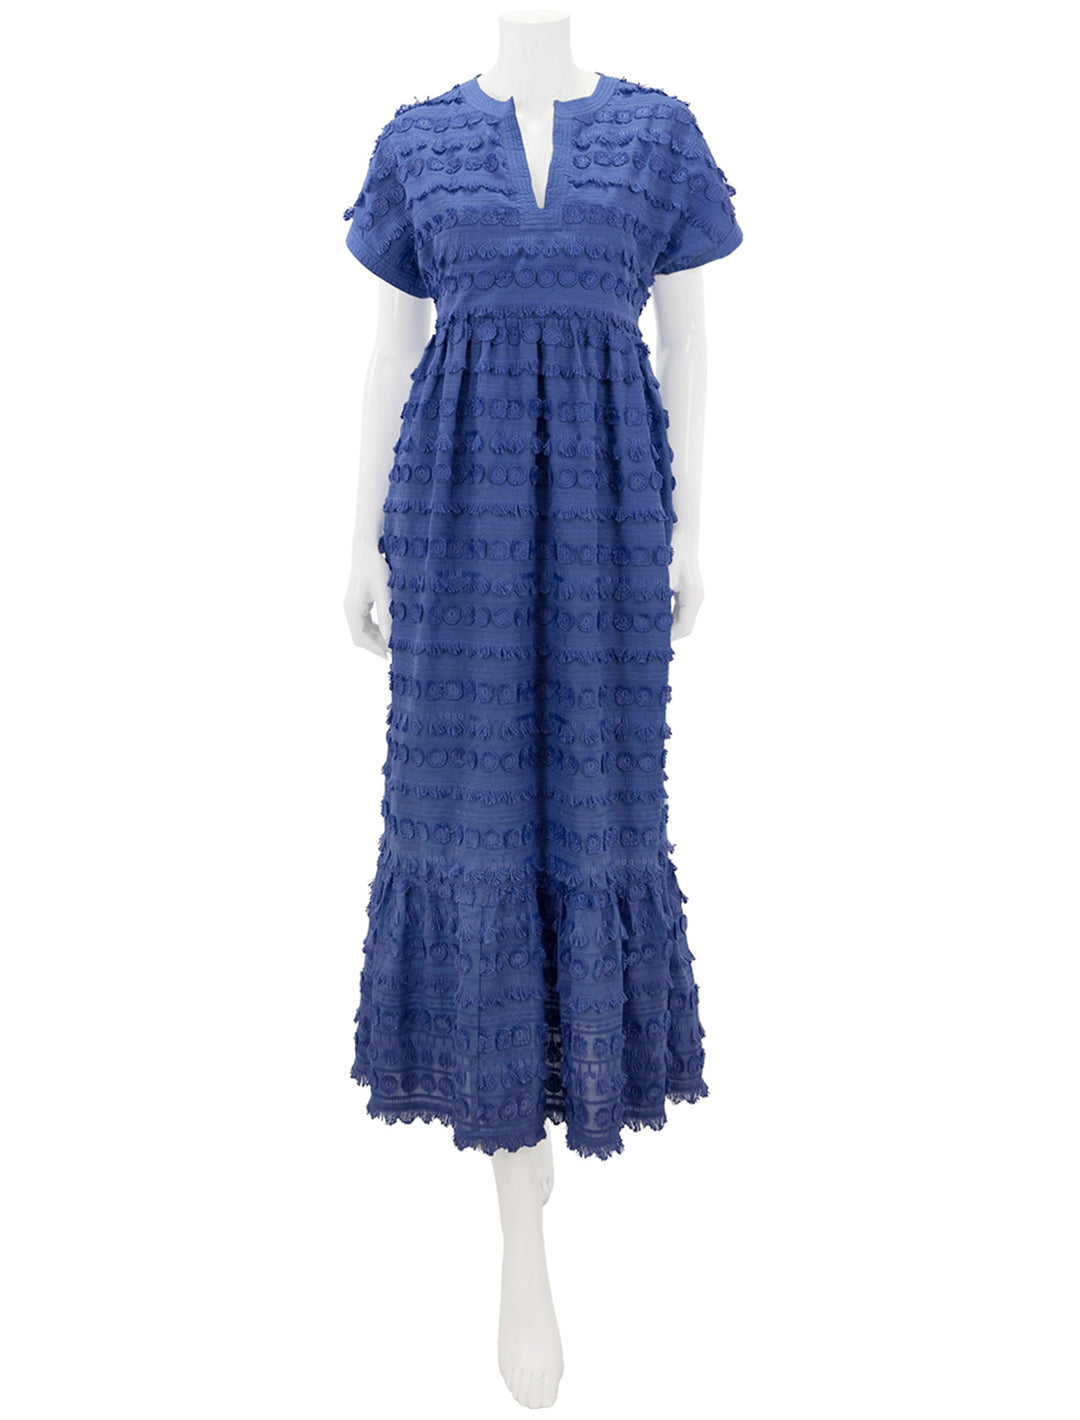 Front view of Marie Oliver's joanna dress in lapis.